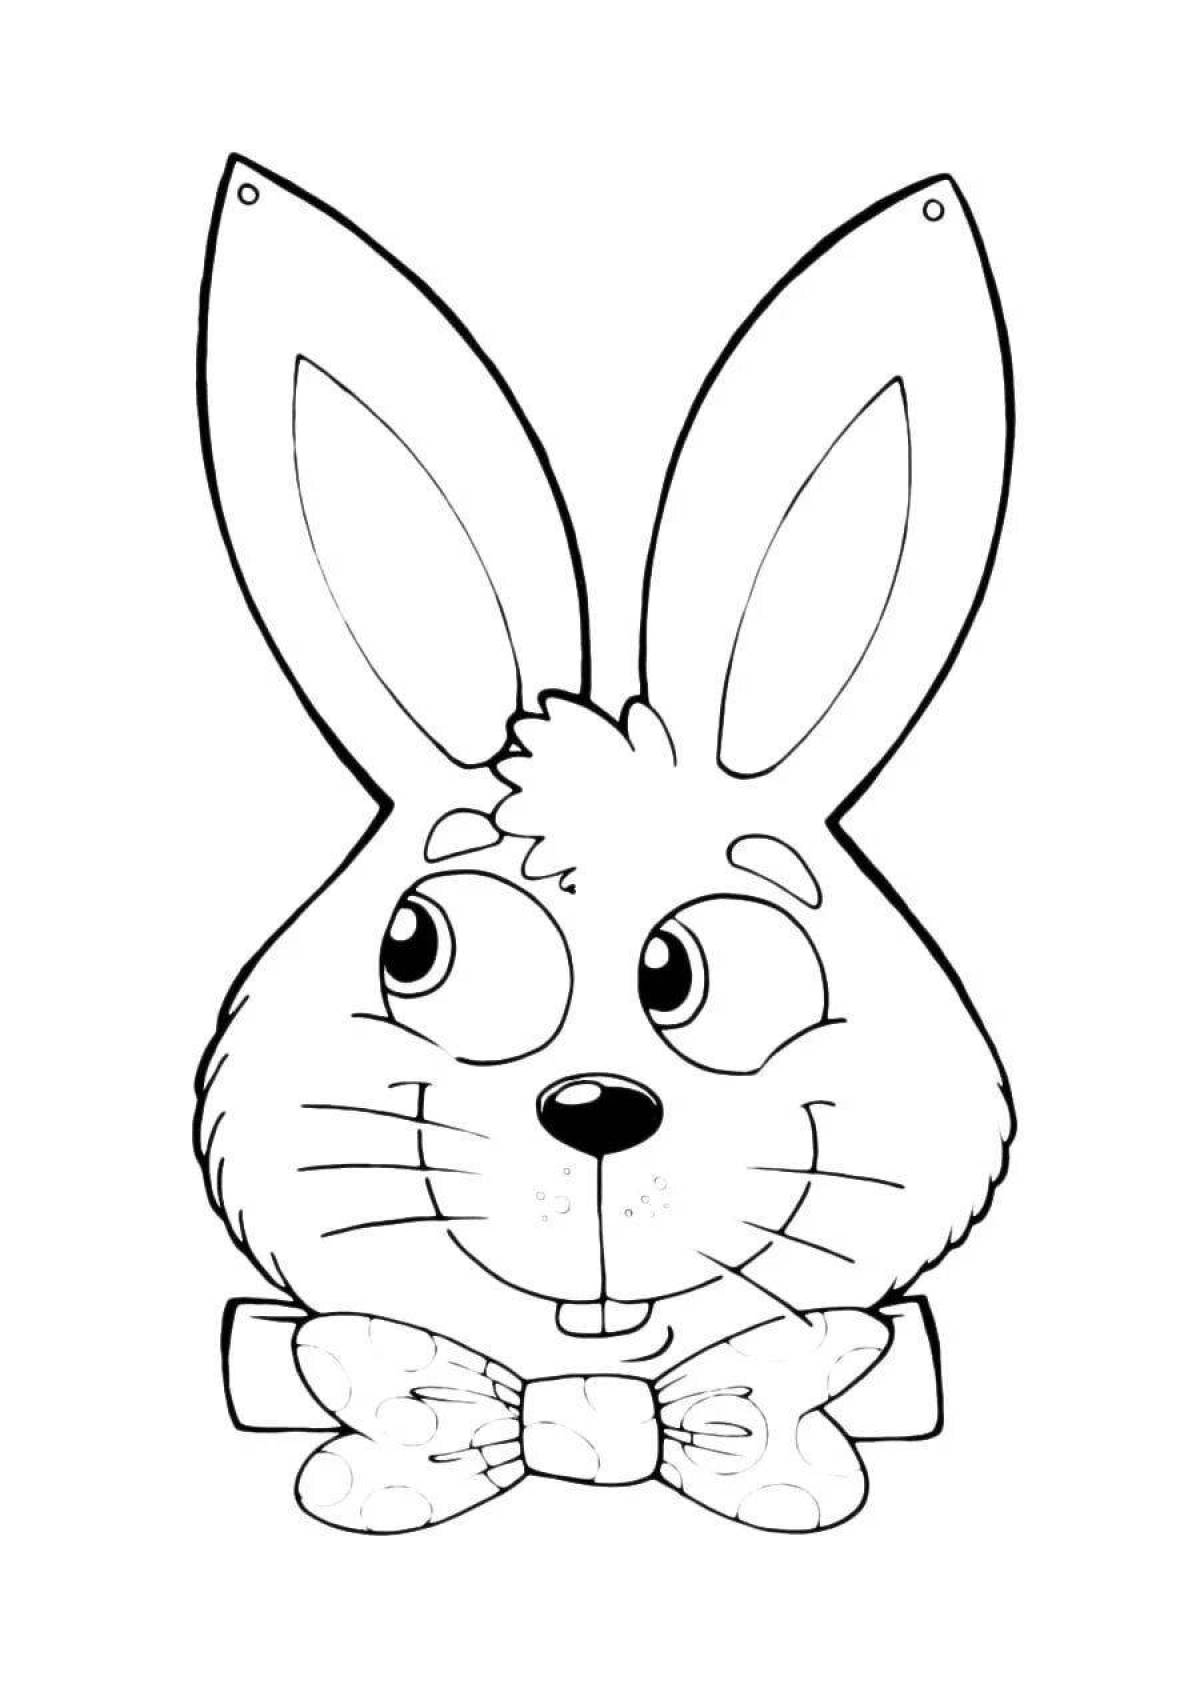 Violent hare face coloring page